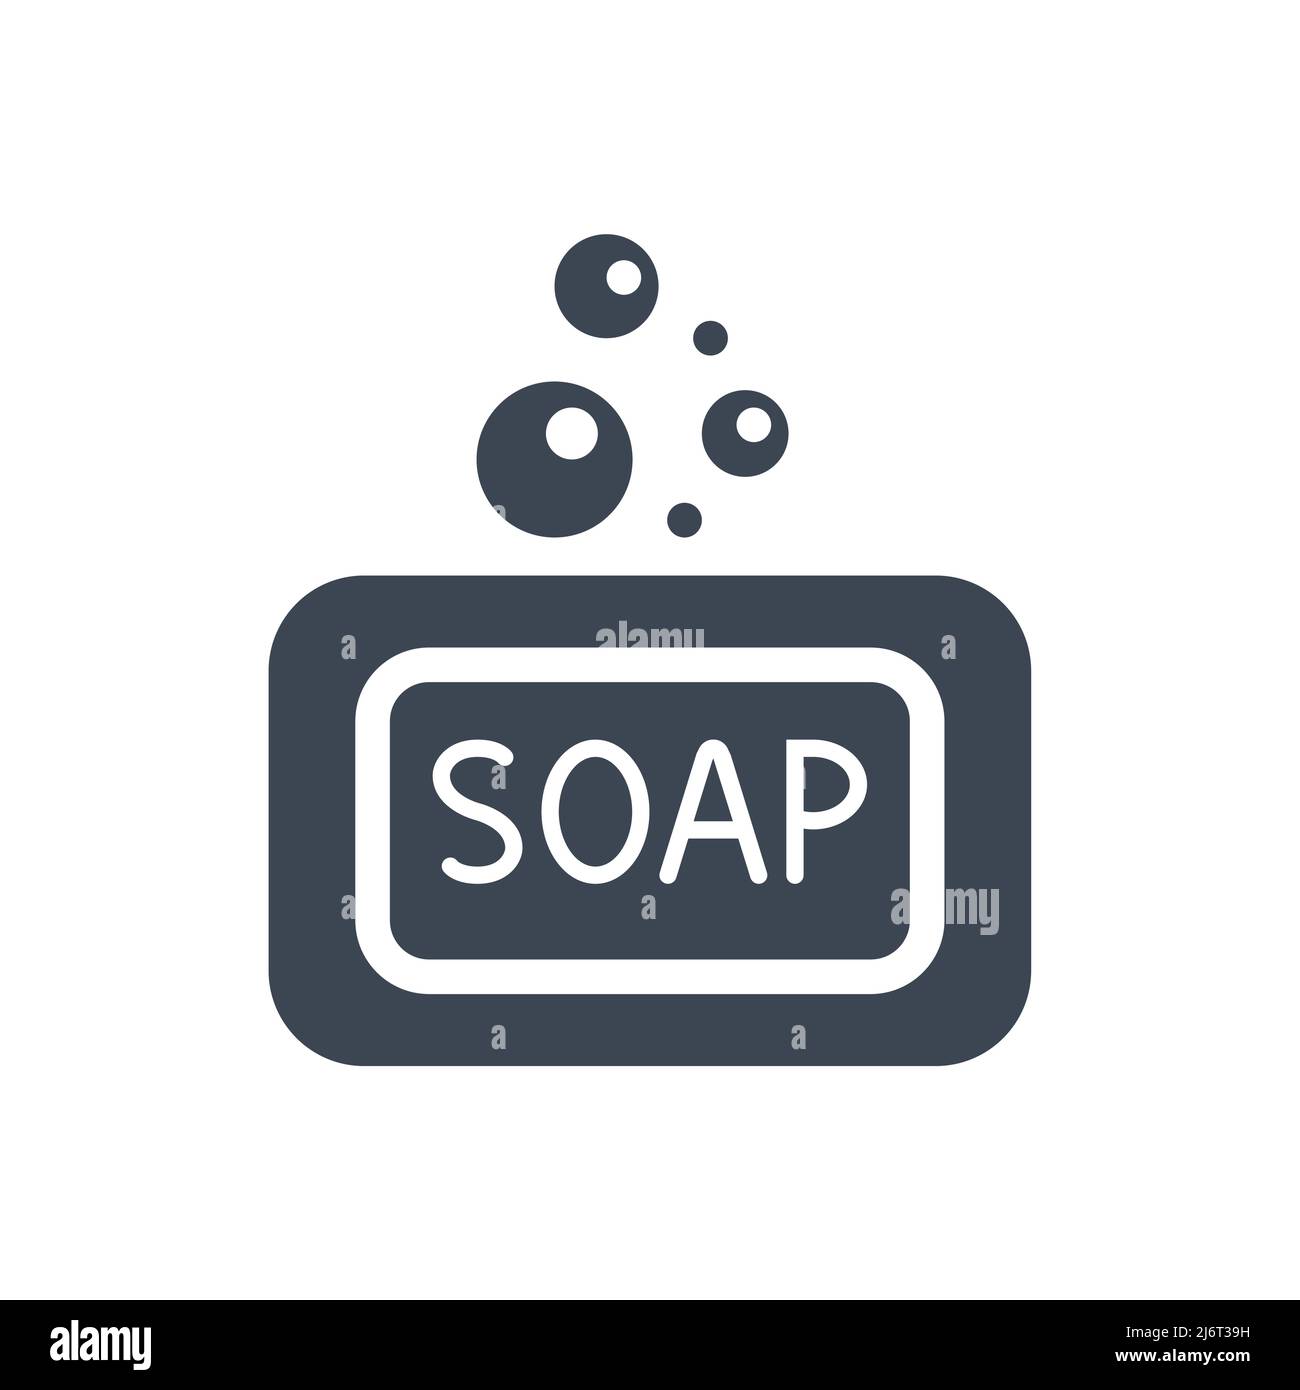 Soap related vector glyph icon. Soap sign. Isolated on white background. Editable vector illustration Stock Vector